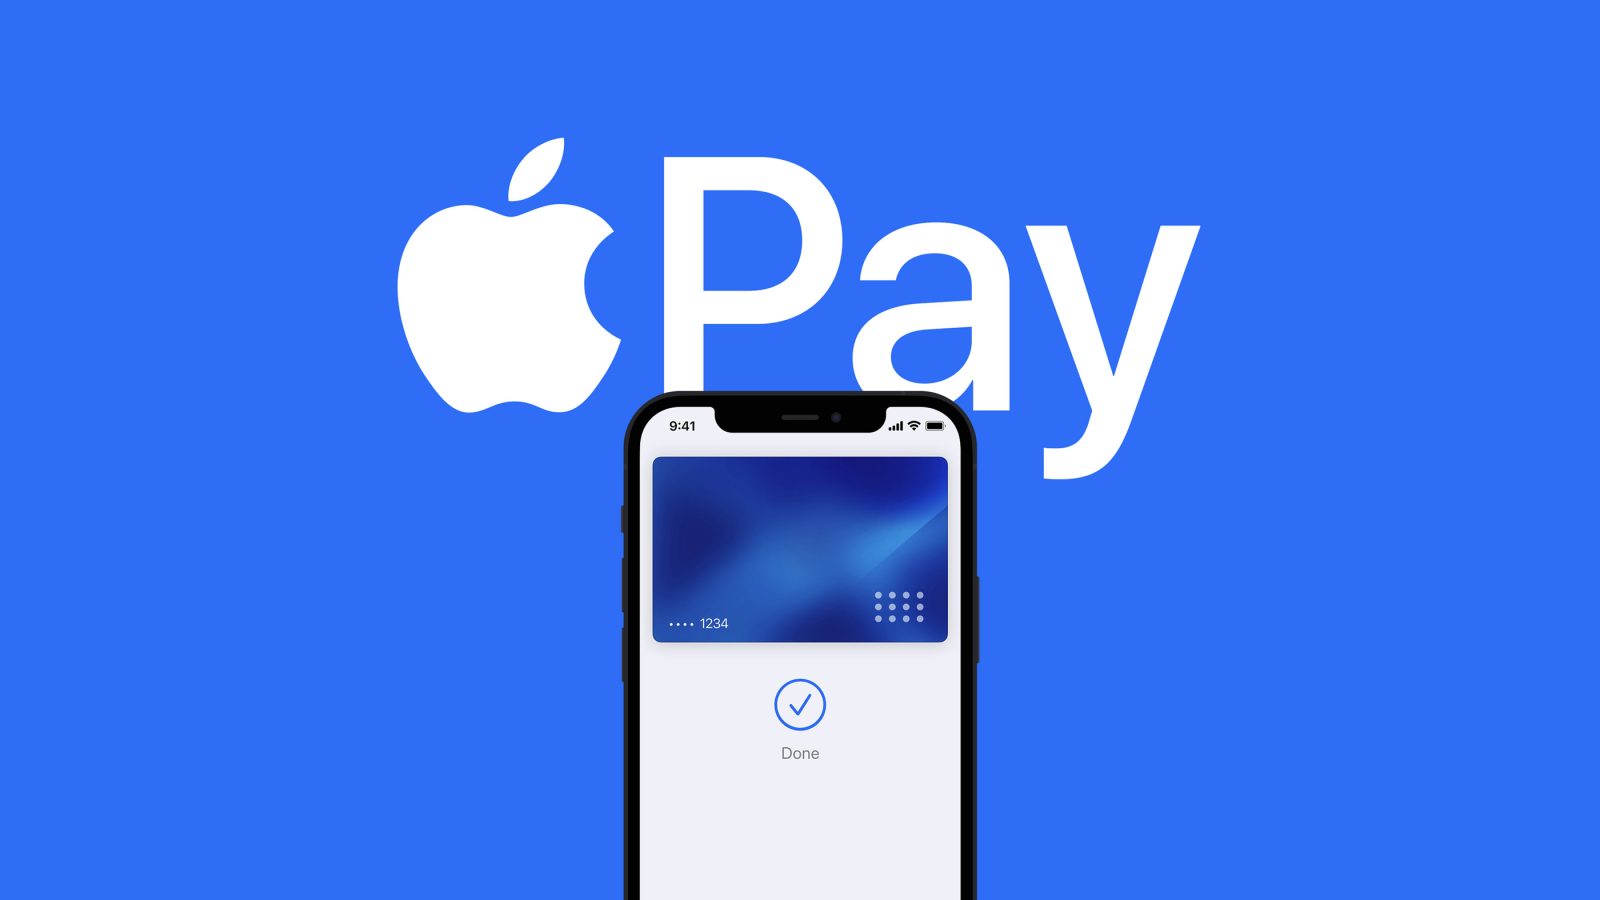 Apple Pay is coming to South Korea very soon